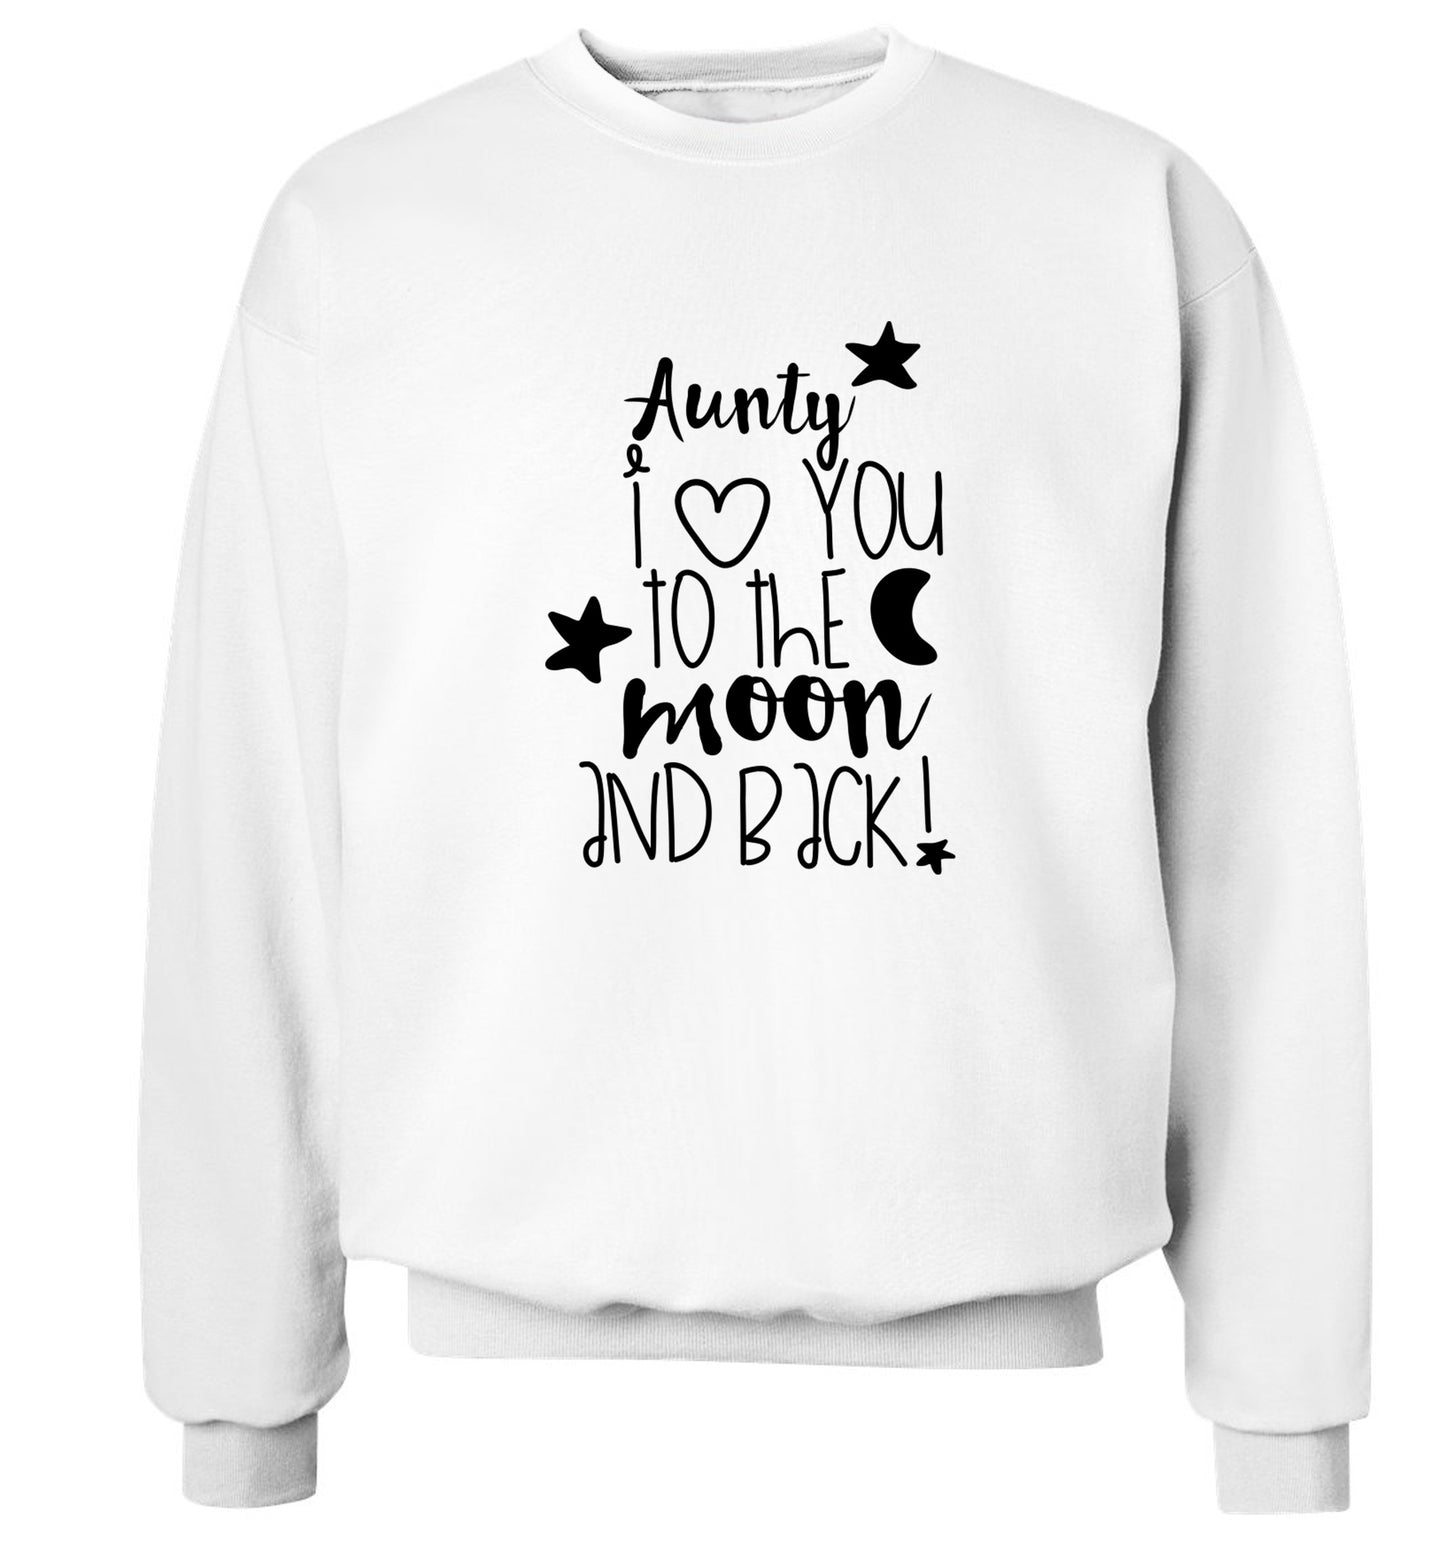 Aunty I love you to the moon and back Adult's unisex white  sweater 2XL